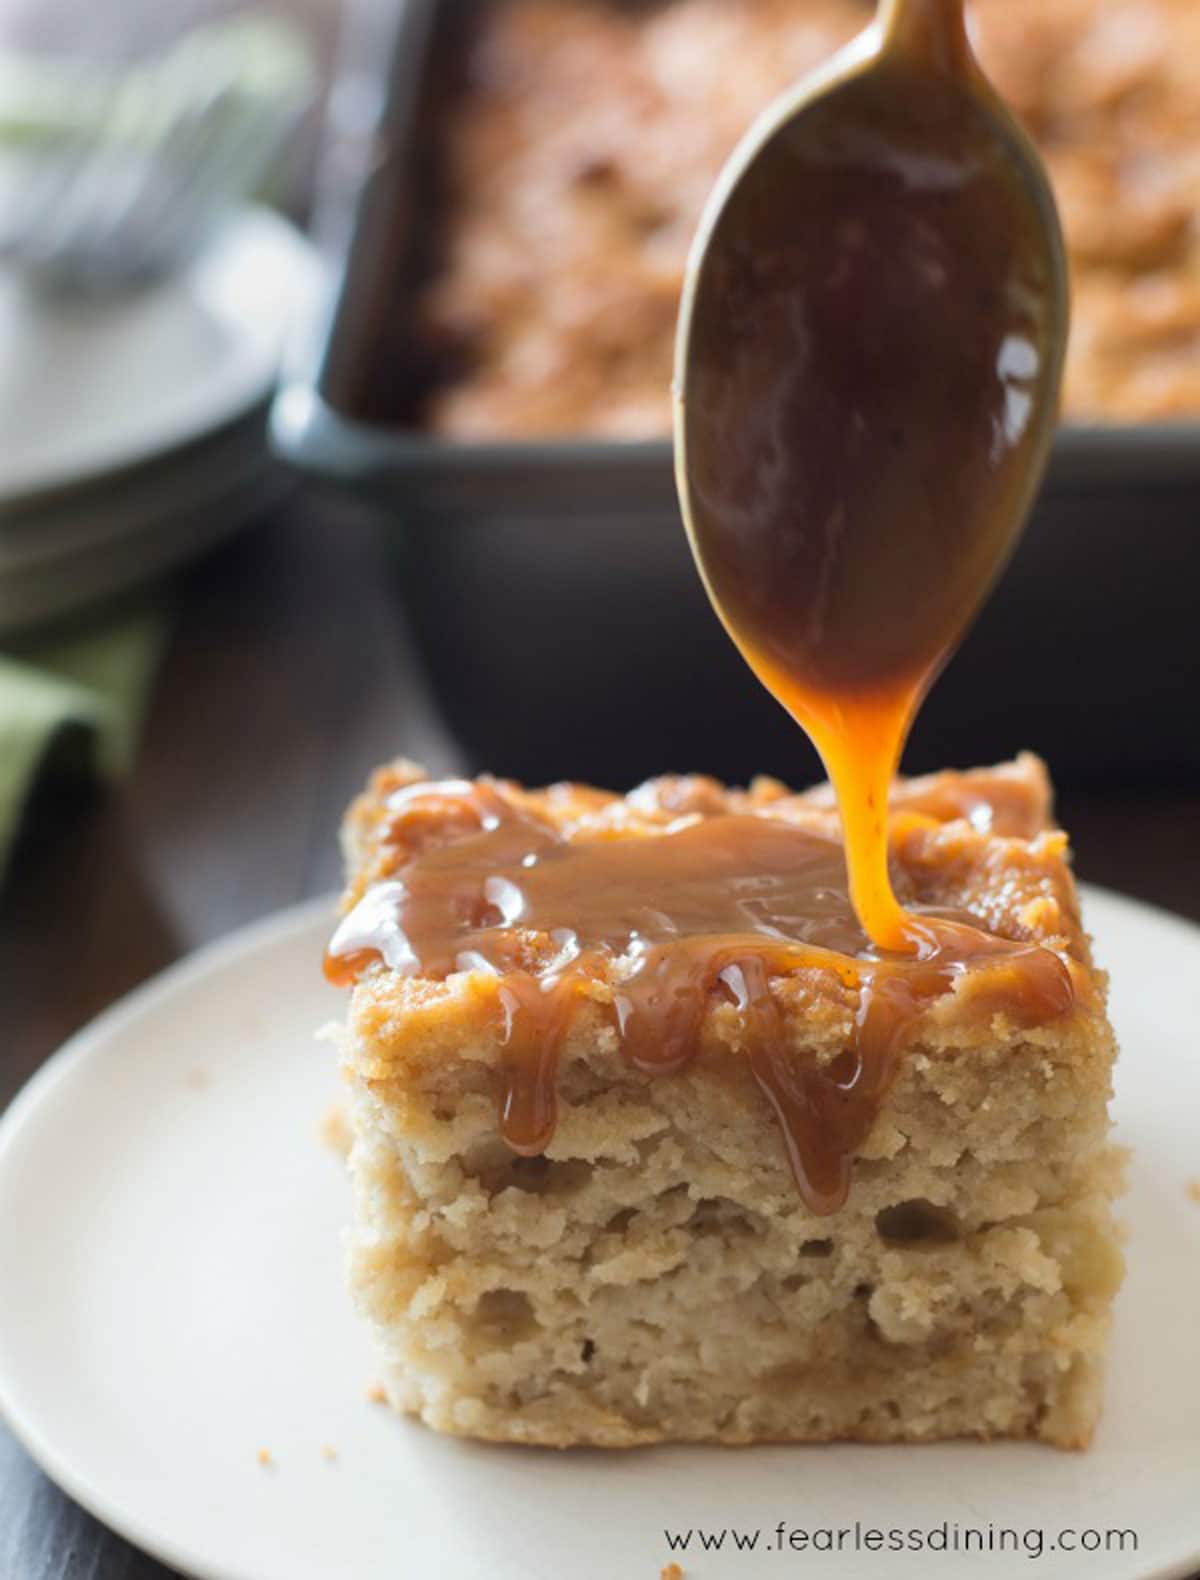 a spoon drizzling caramel over a slice of apple cake